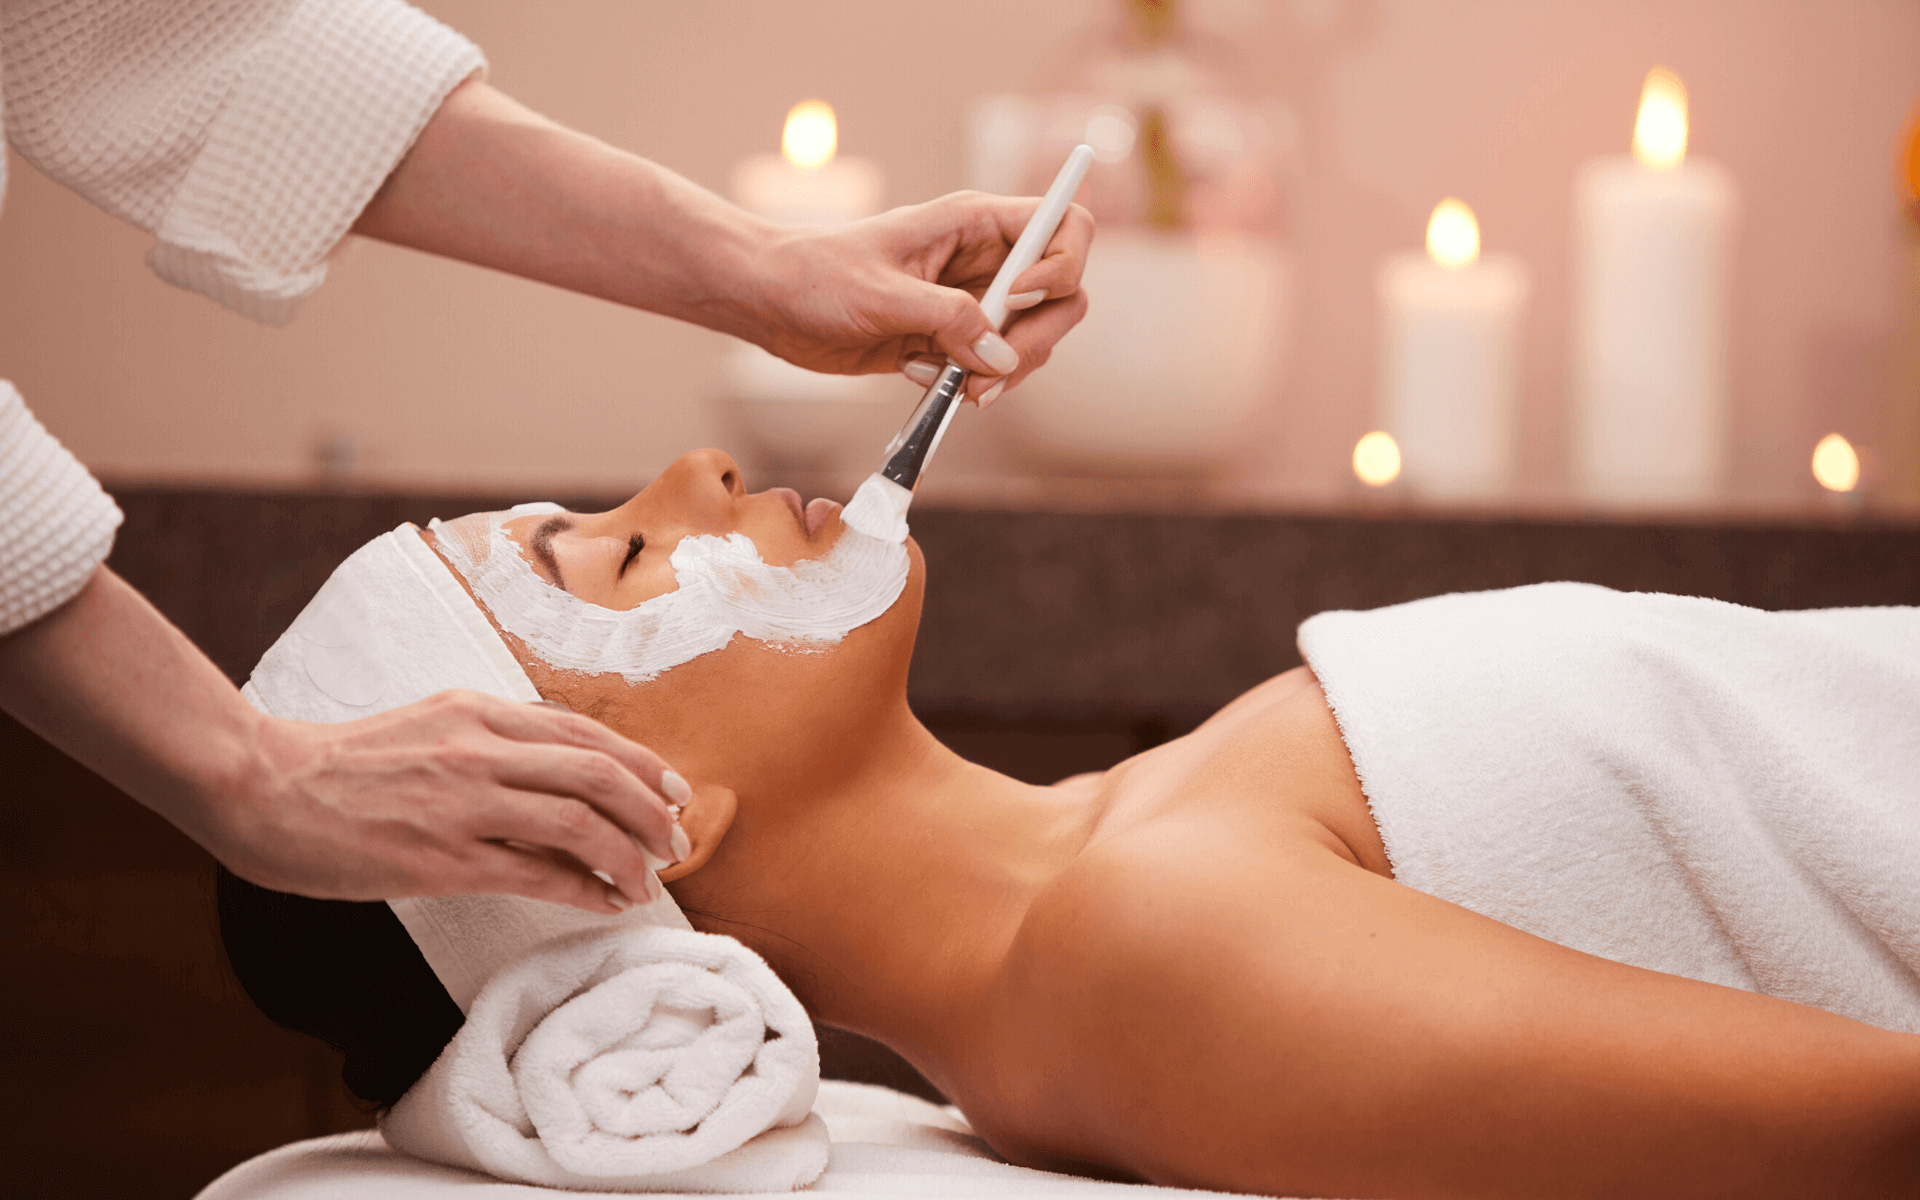 Best Skin Care Services in Dehradun - Facials, Chemical Peels, party Makeup & much more